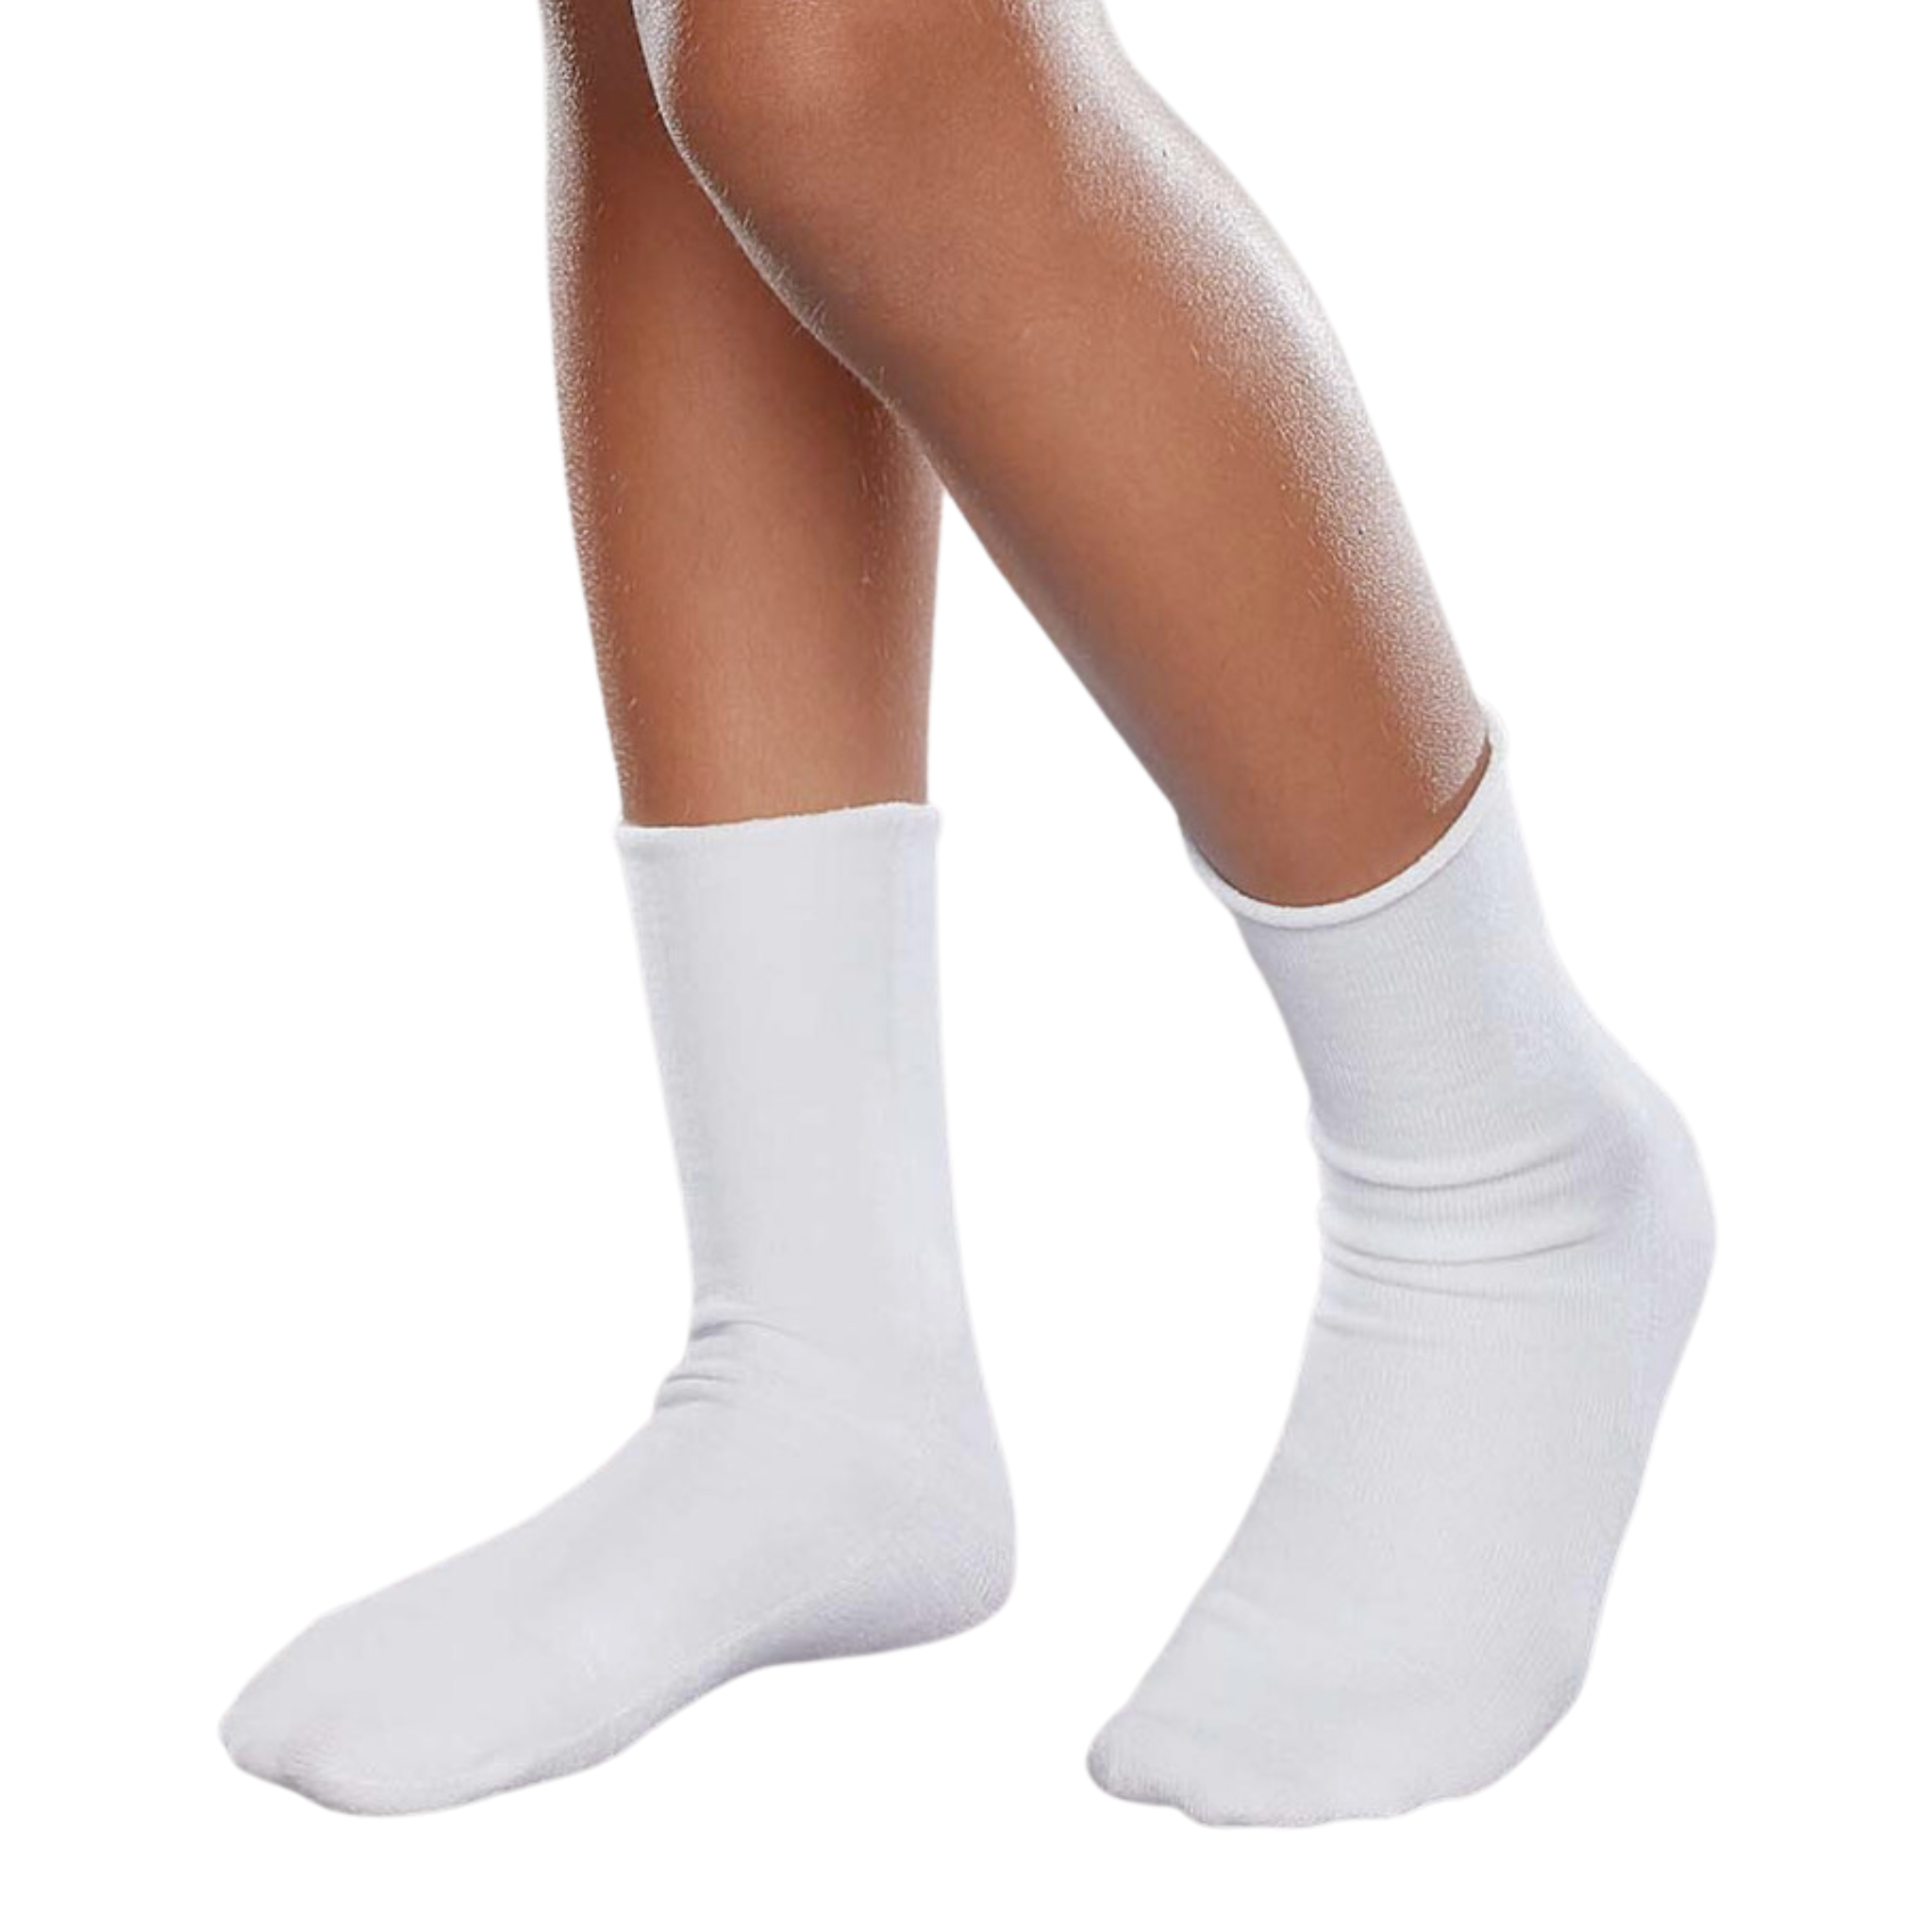 SmartKnitKIDS - Absolutely Seamless Socks - ultimate comfort sock - White - Value Packs